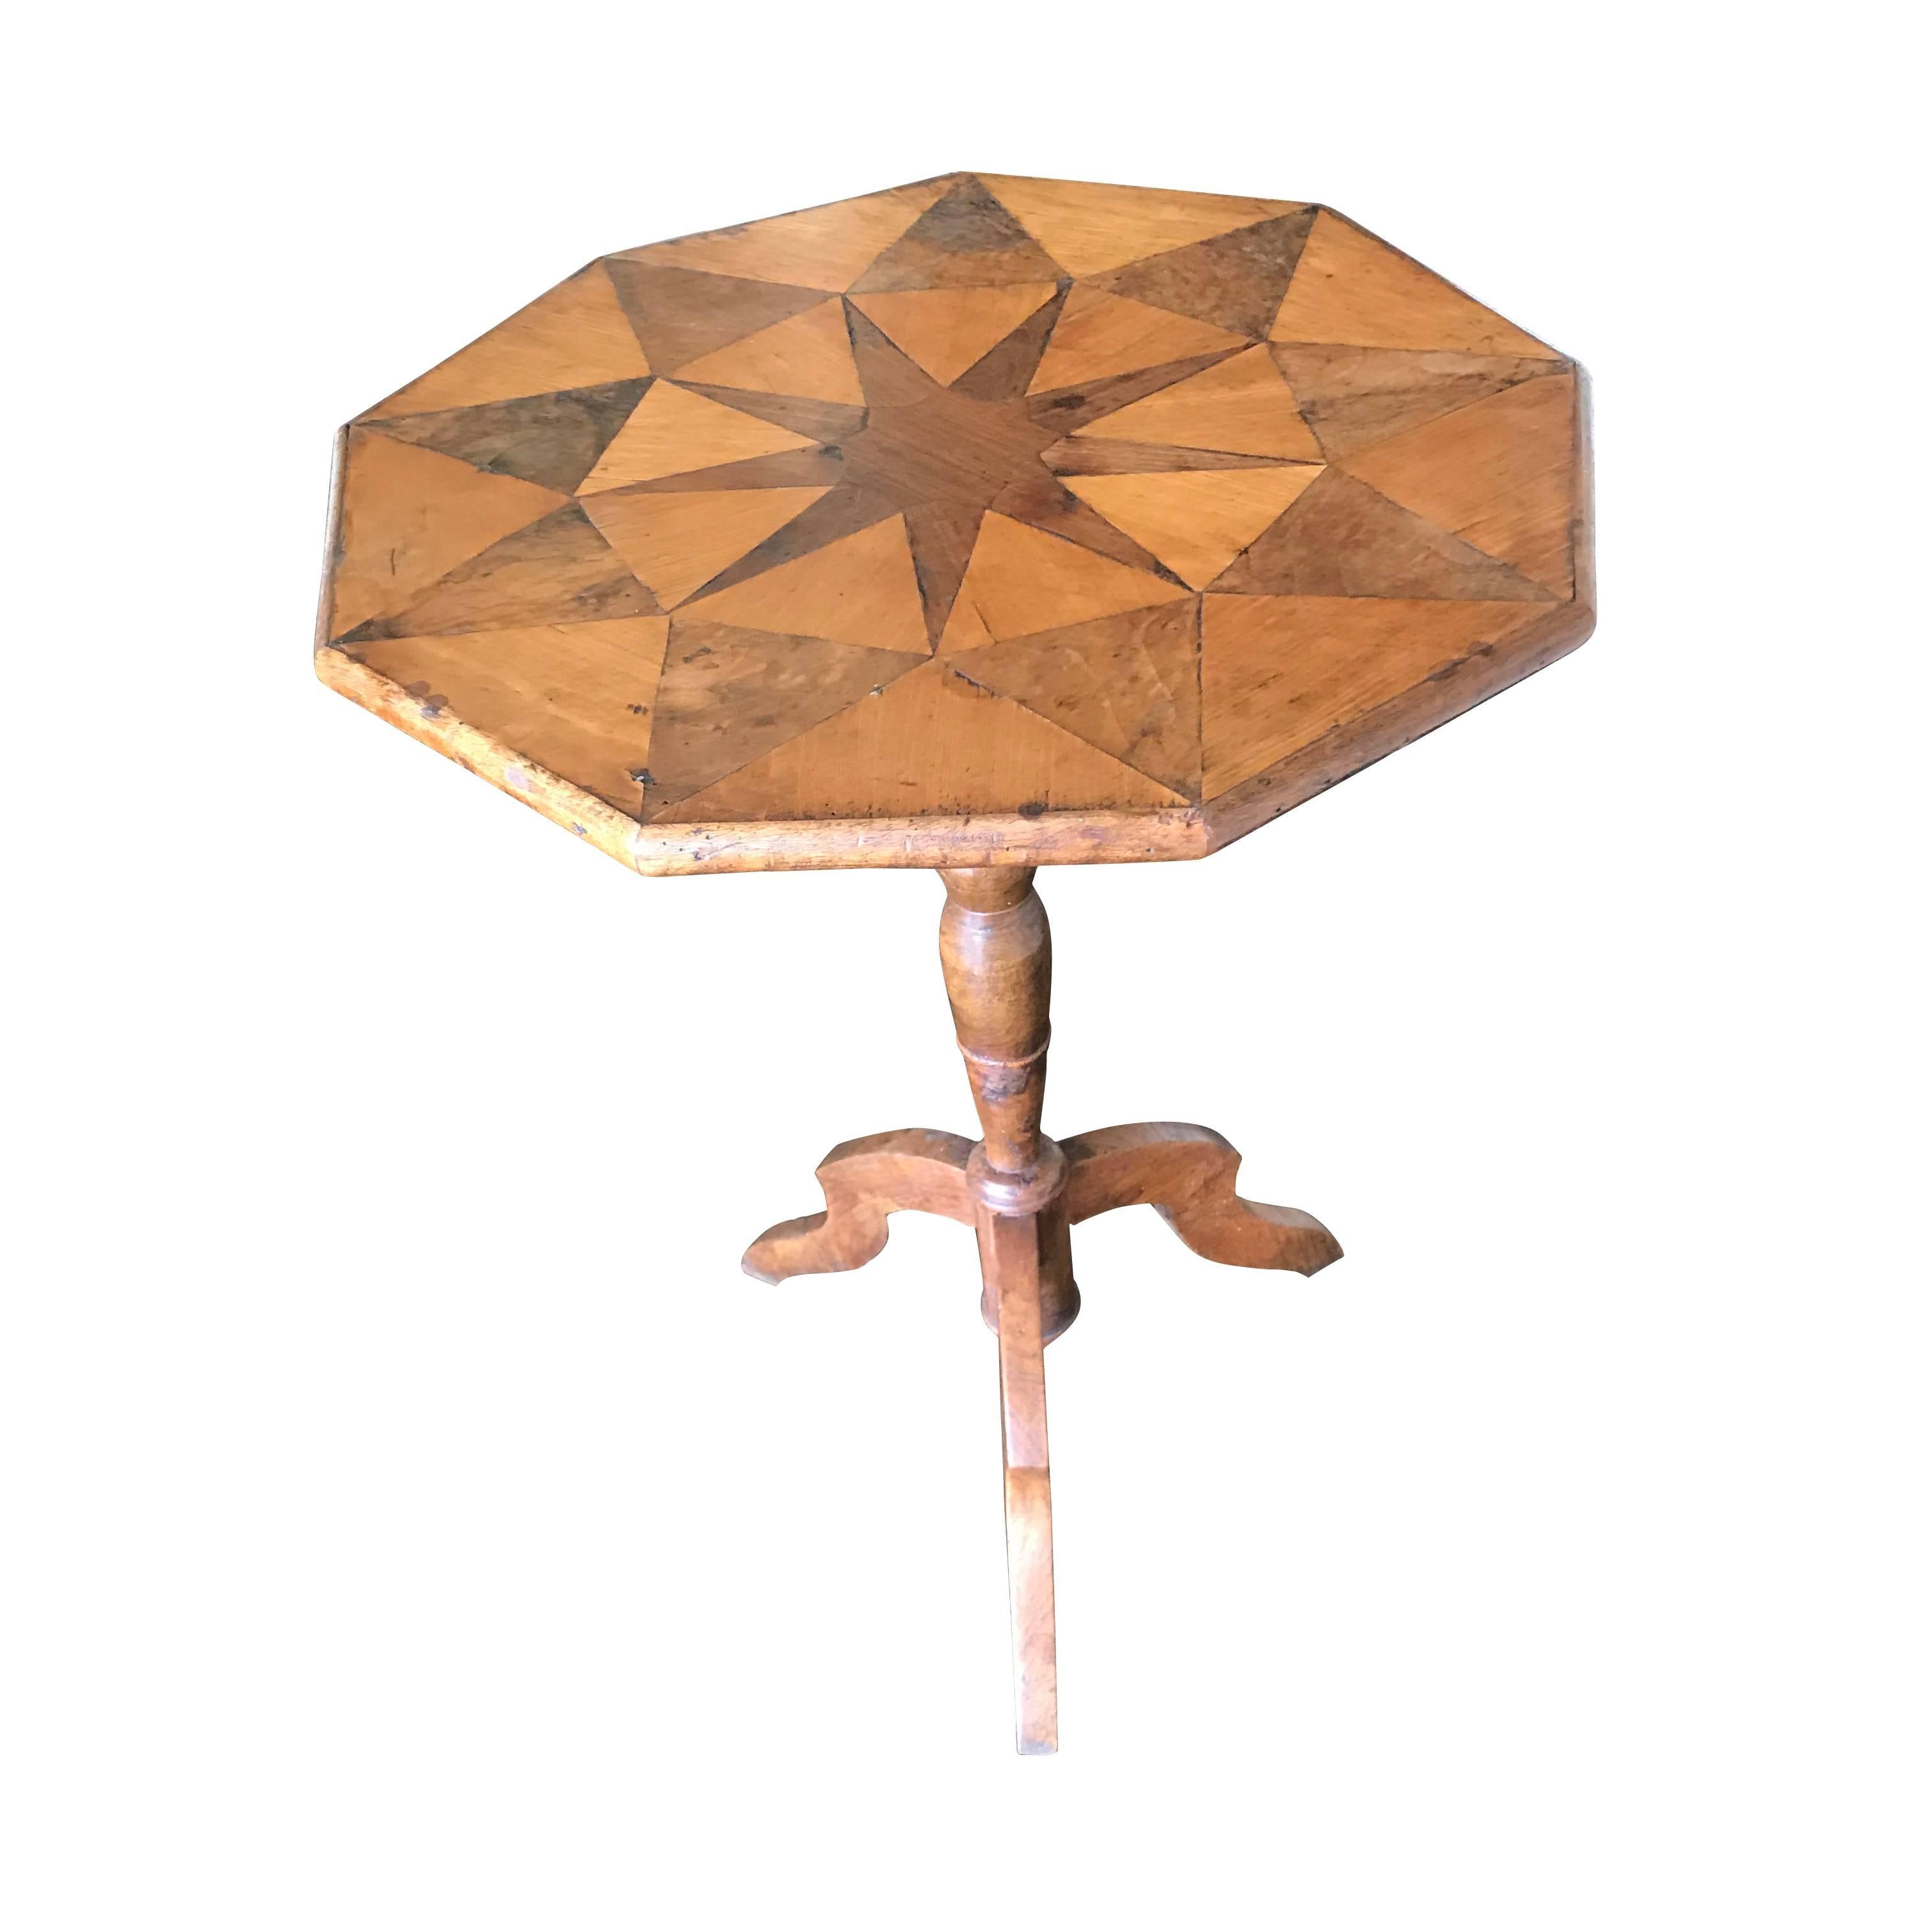 Nine-sided cocktail table with a walnut star and triangles decorating the inlay top.
Spool base and tripod legs.
The table is in excellent condition.